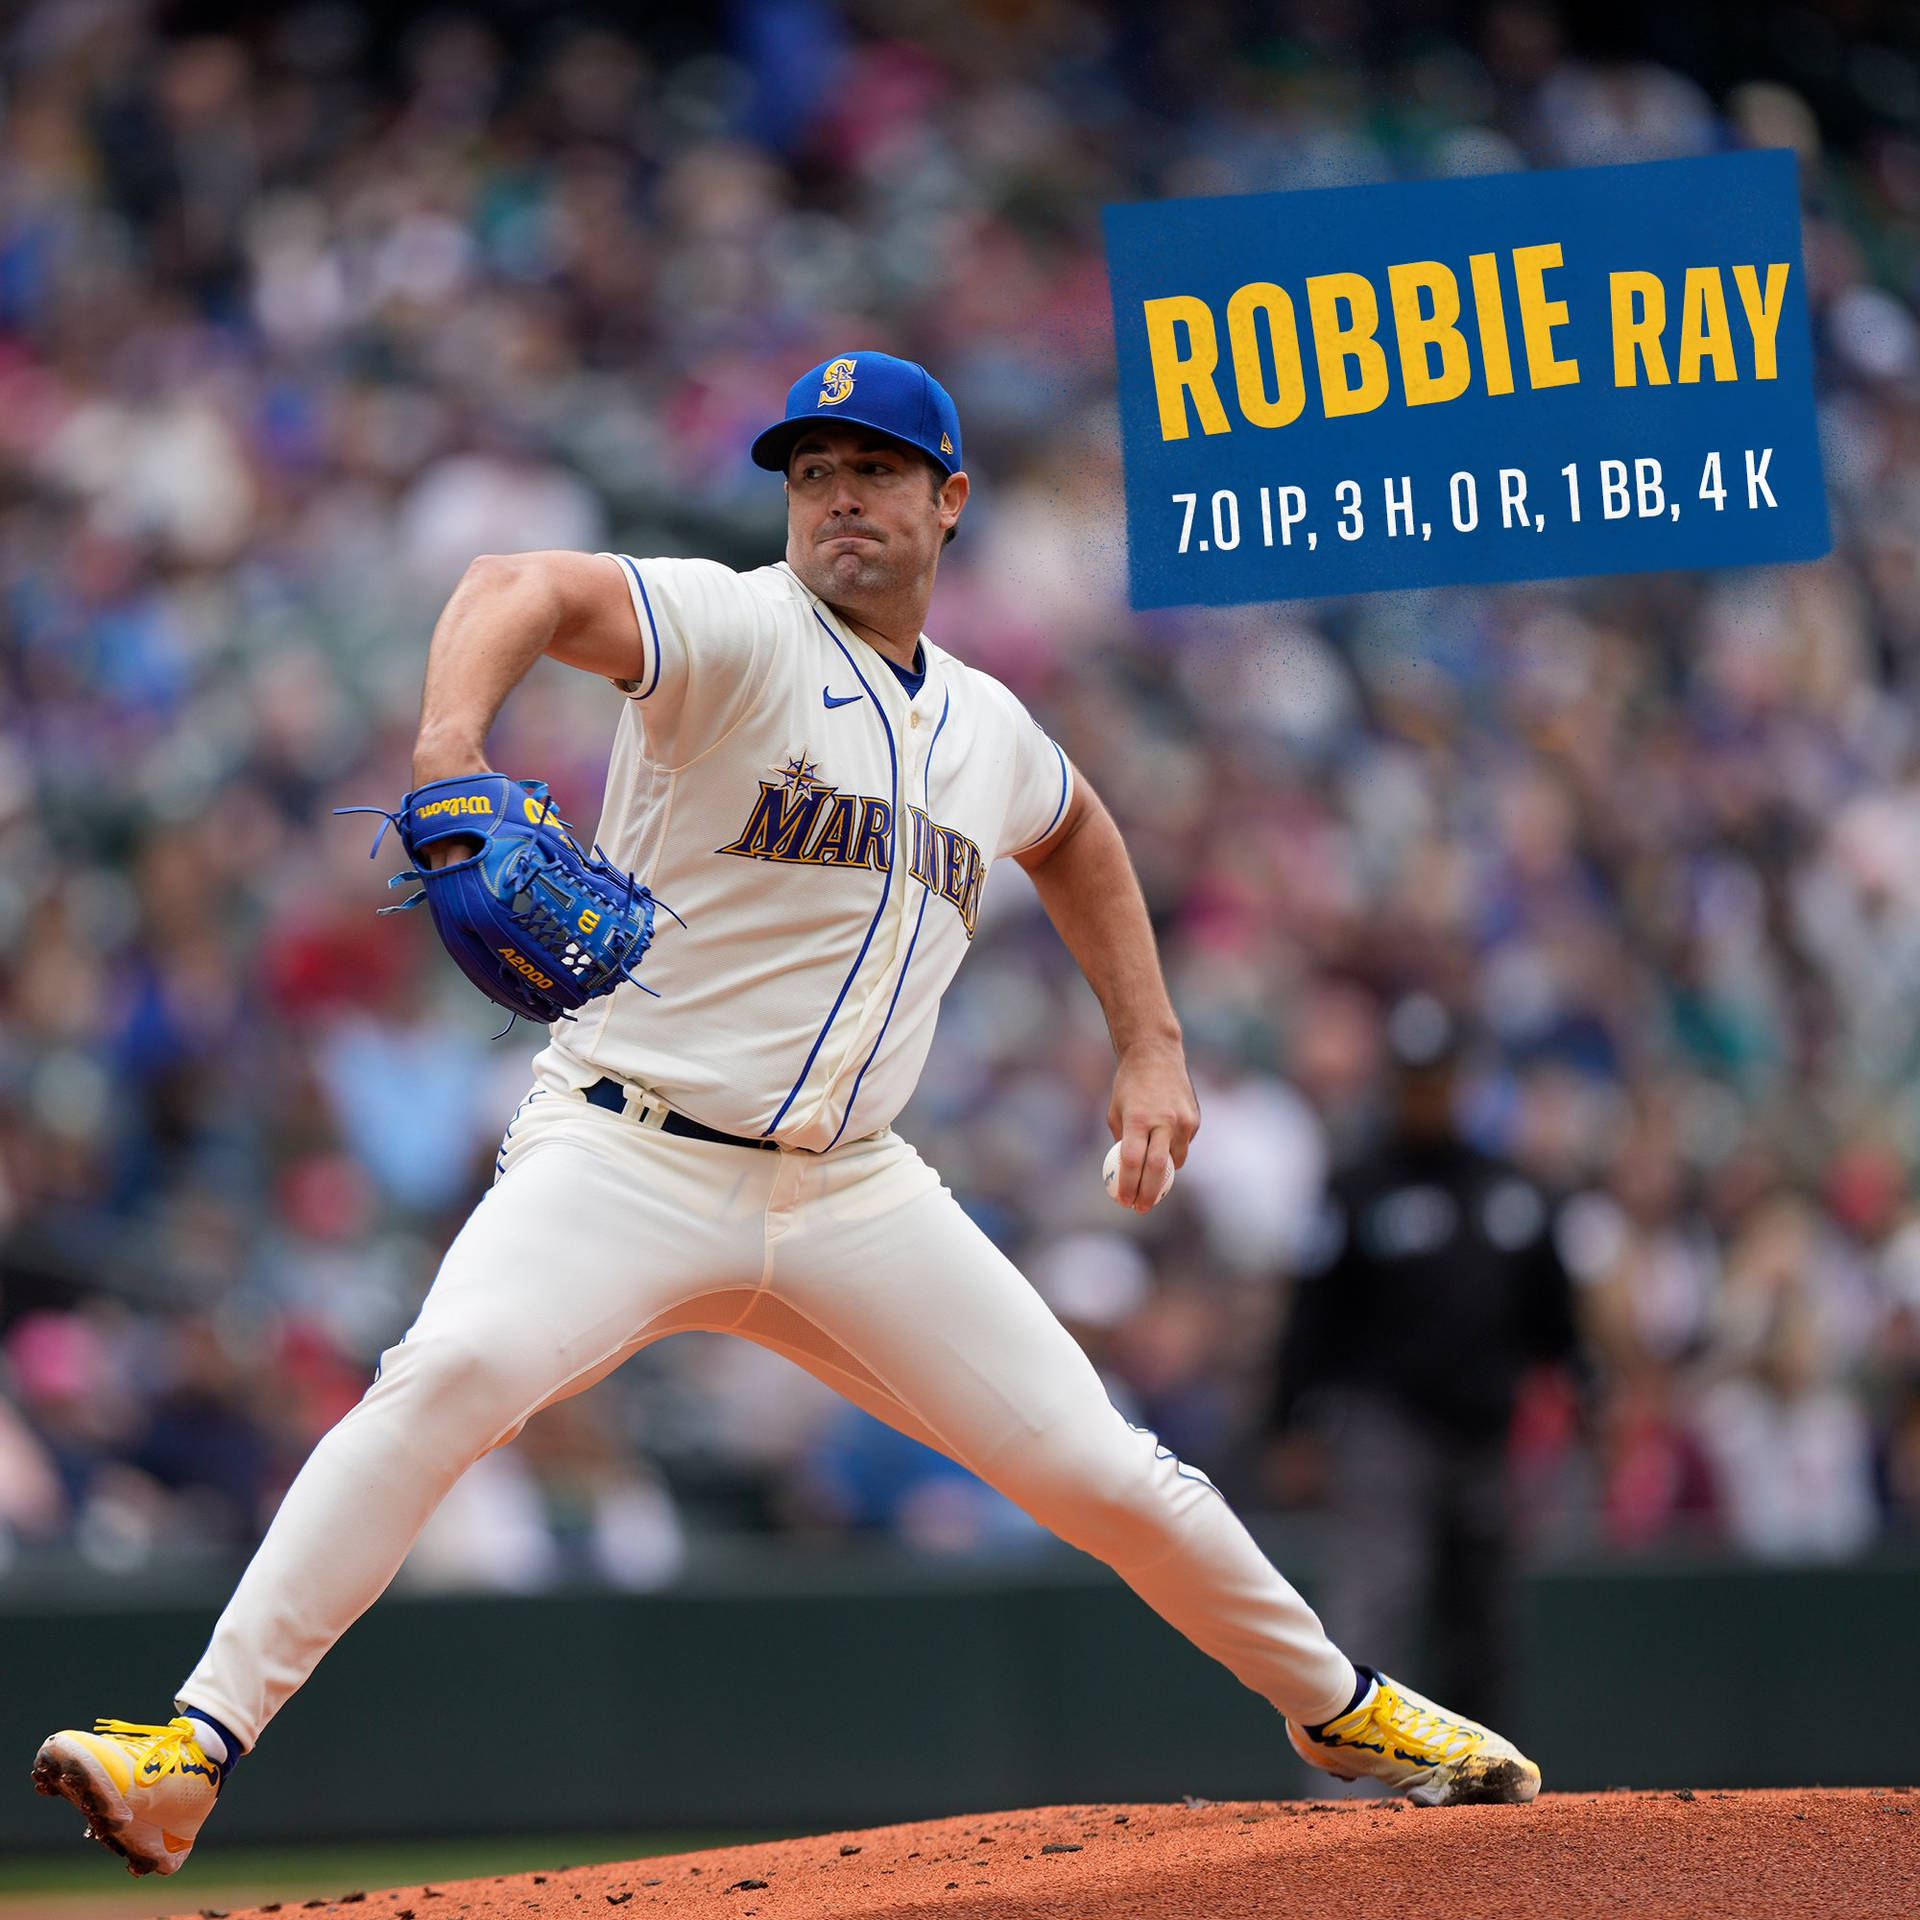 Robbie Ray About To Throw A Ball Wallpaper